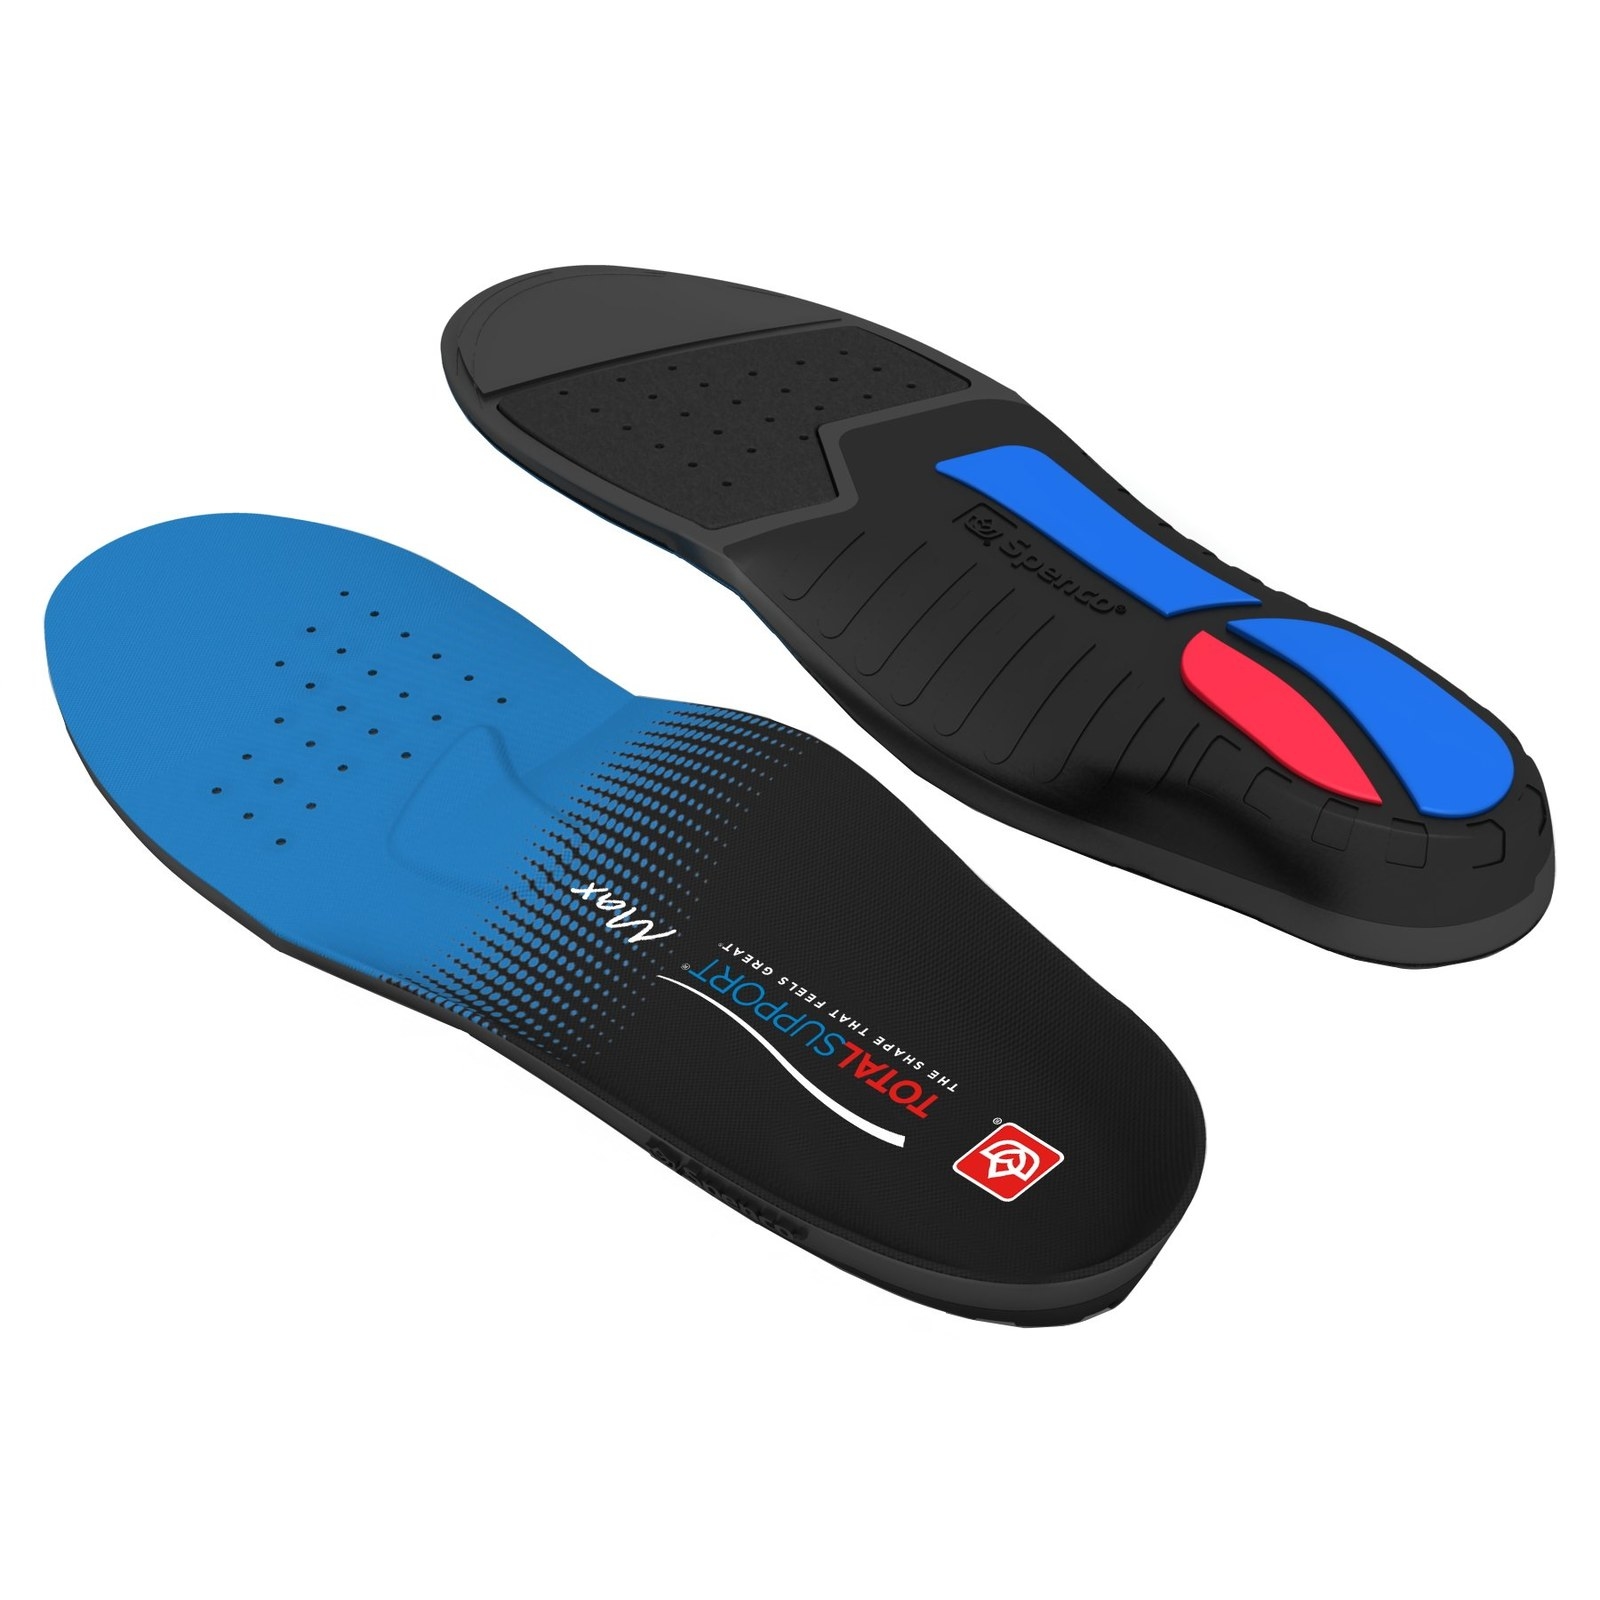 Choose The Best Insoles For Your Shoes